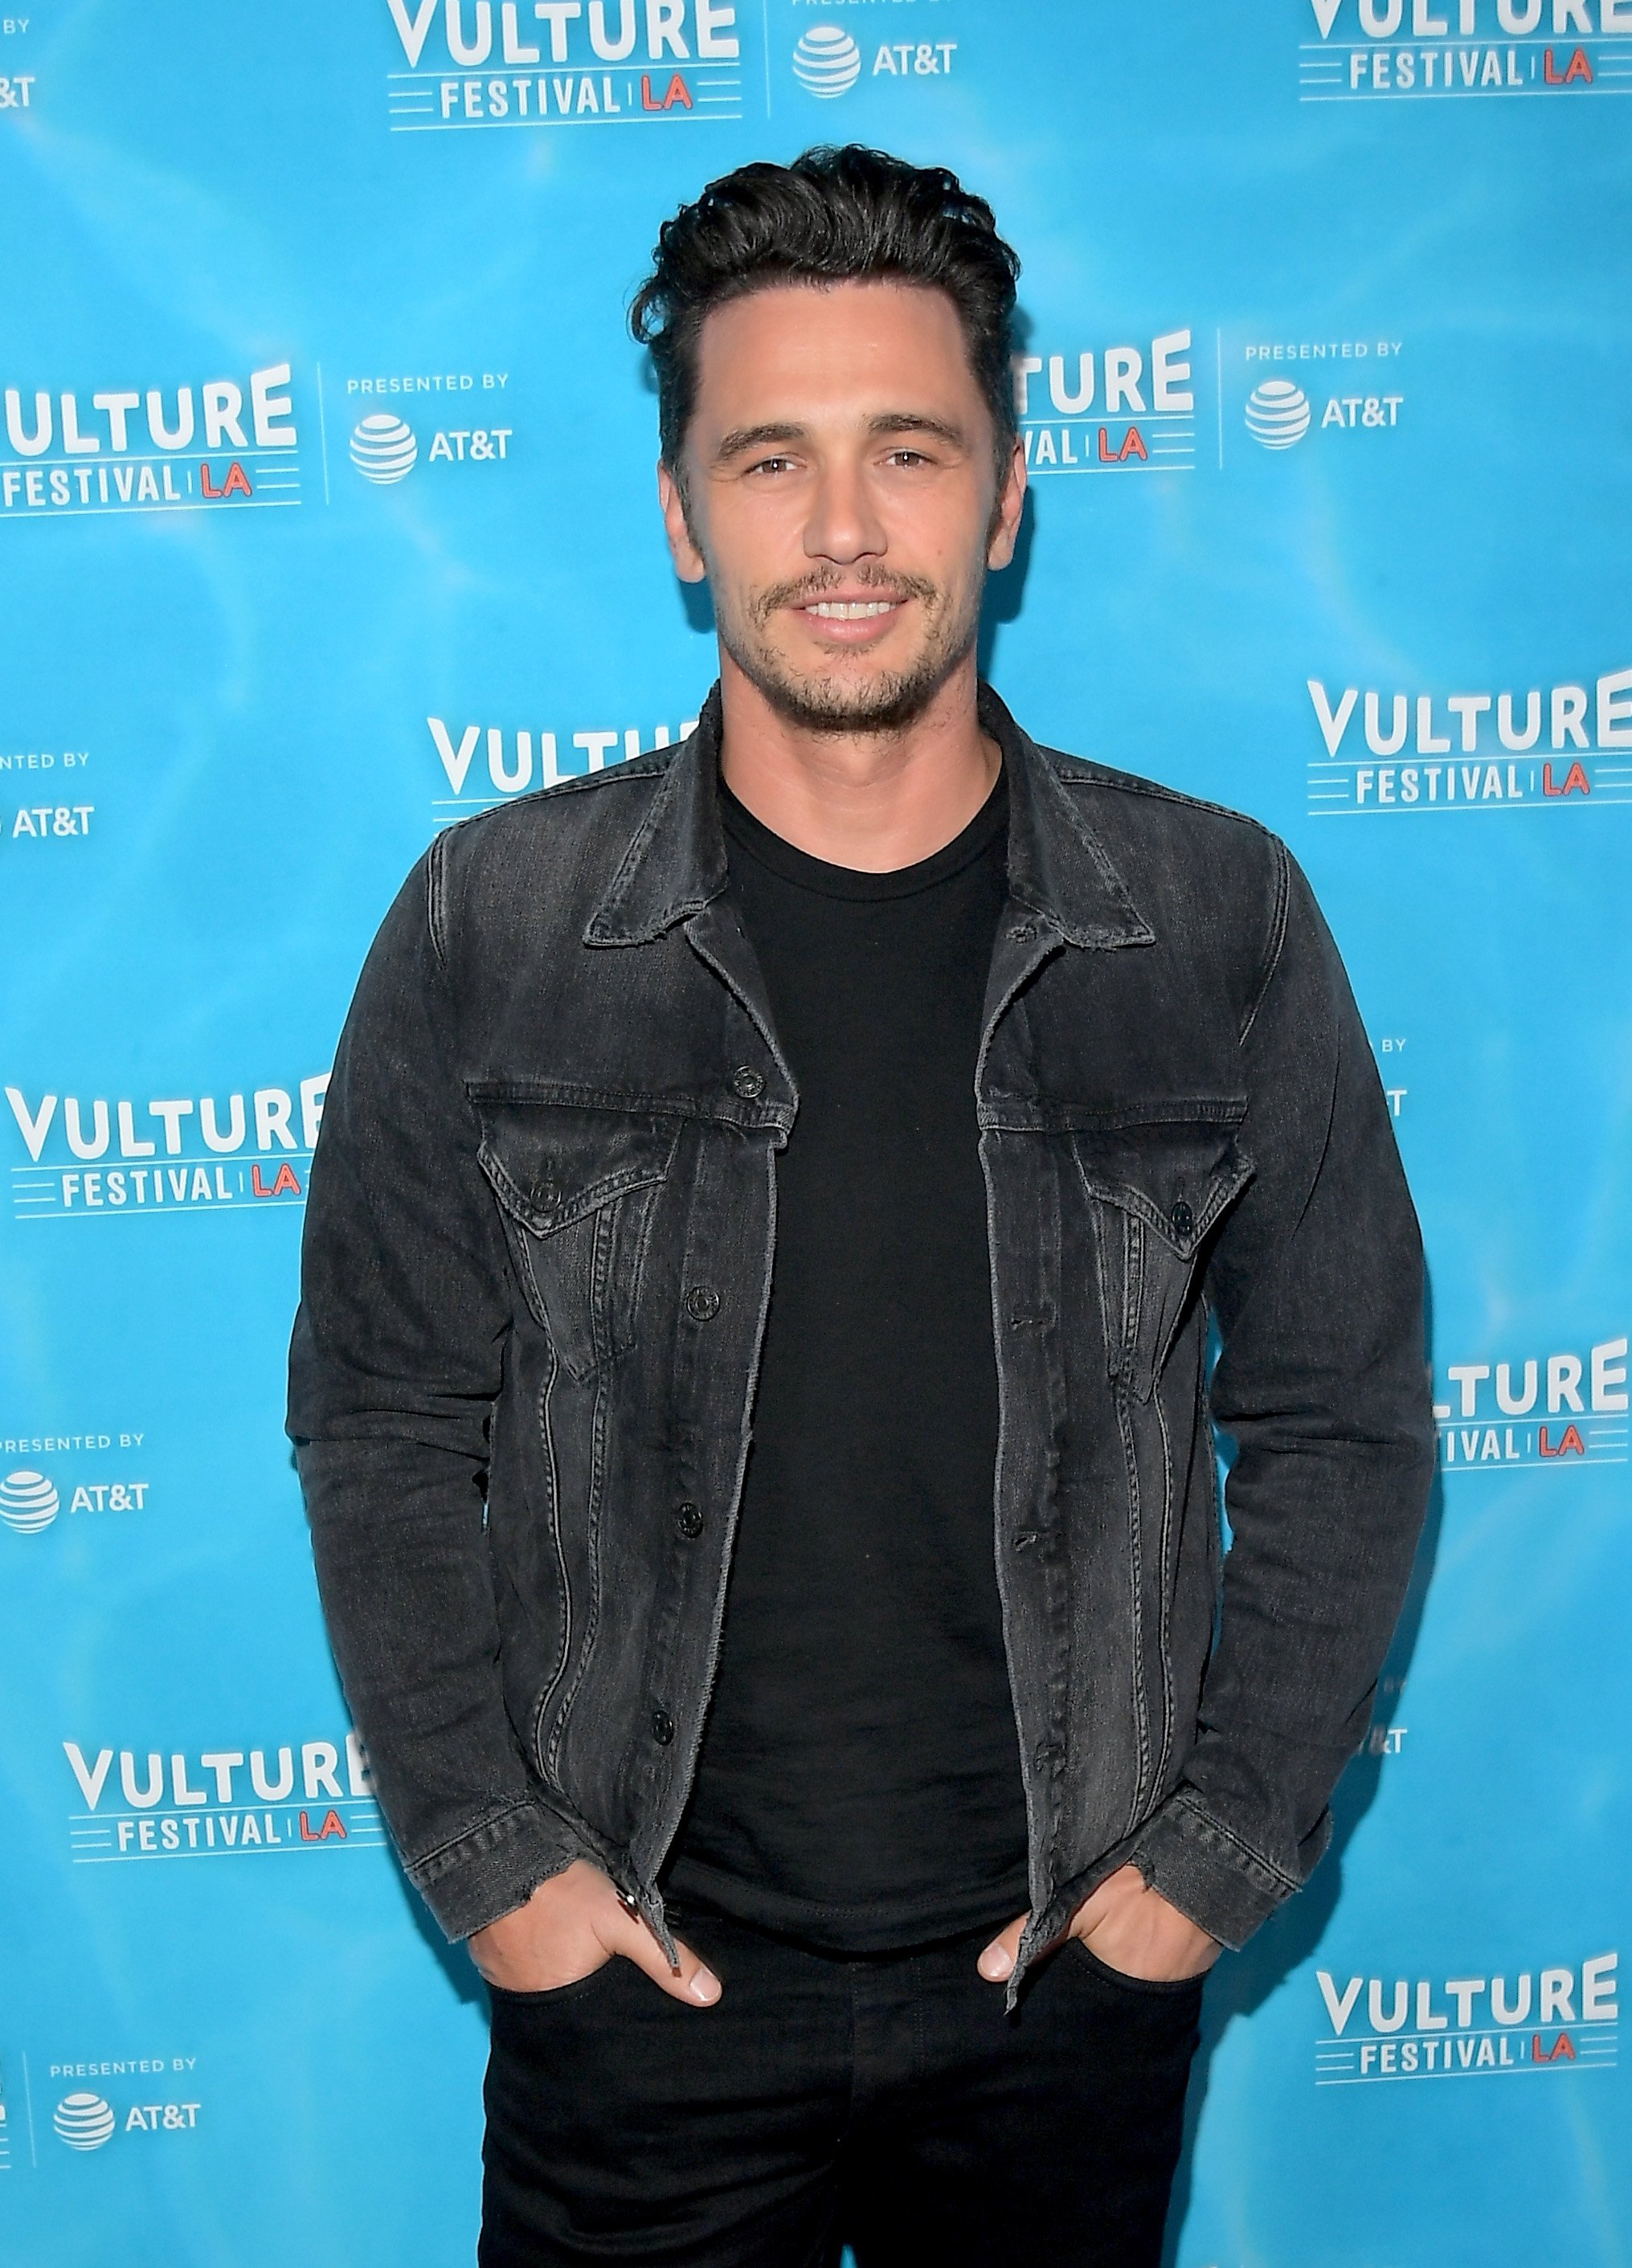 James Franco attends the "Disaster Artist" panel during Vulture Festival LA Presented by AT&T at Hollywood Roosevelt Hotel on November 18, 2017, in Hollywood, California. | Source: Getty Images